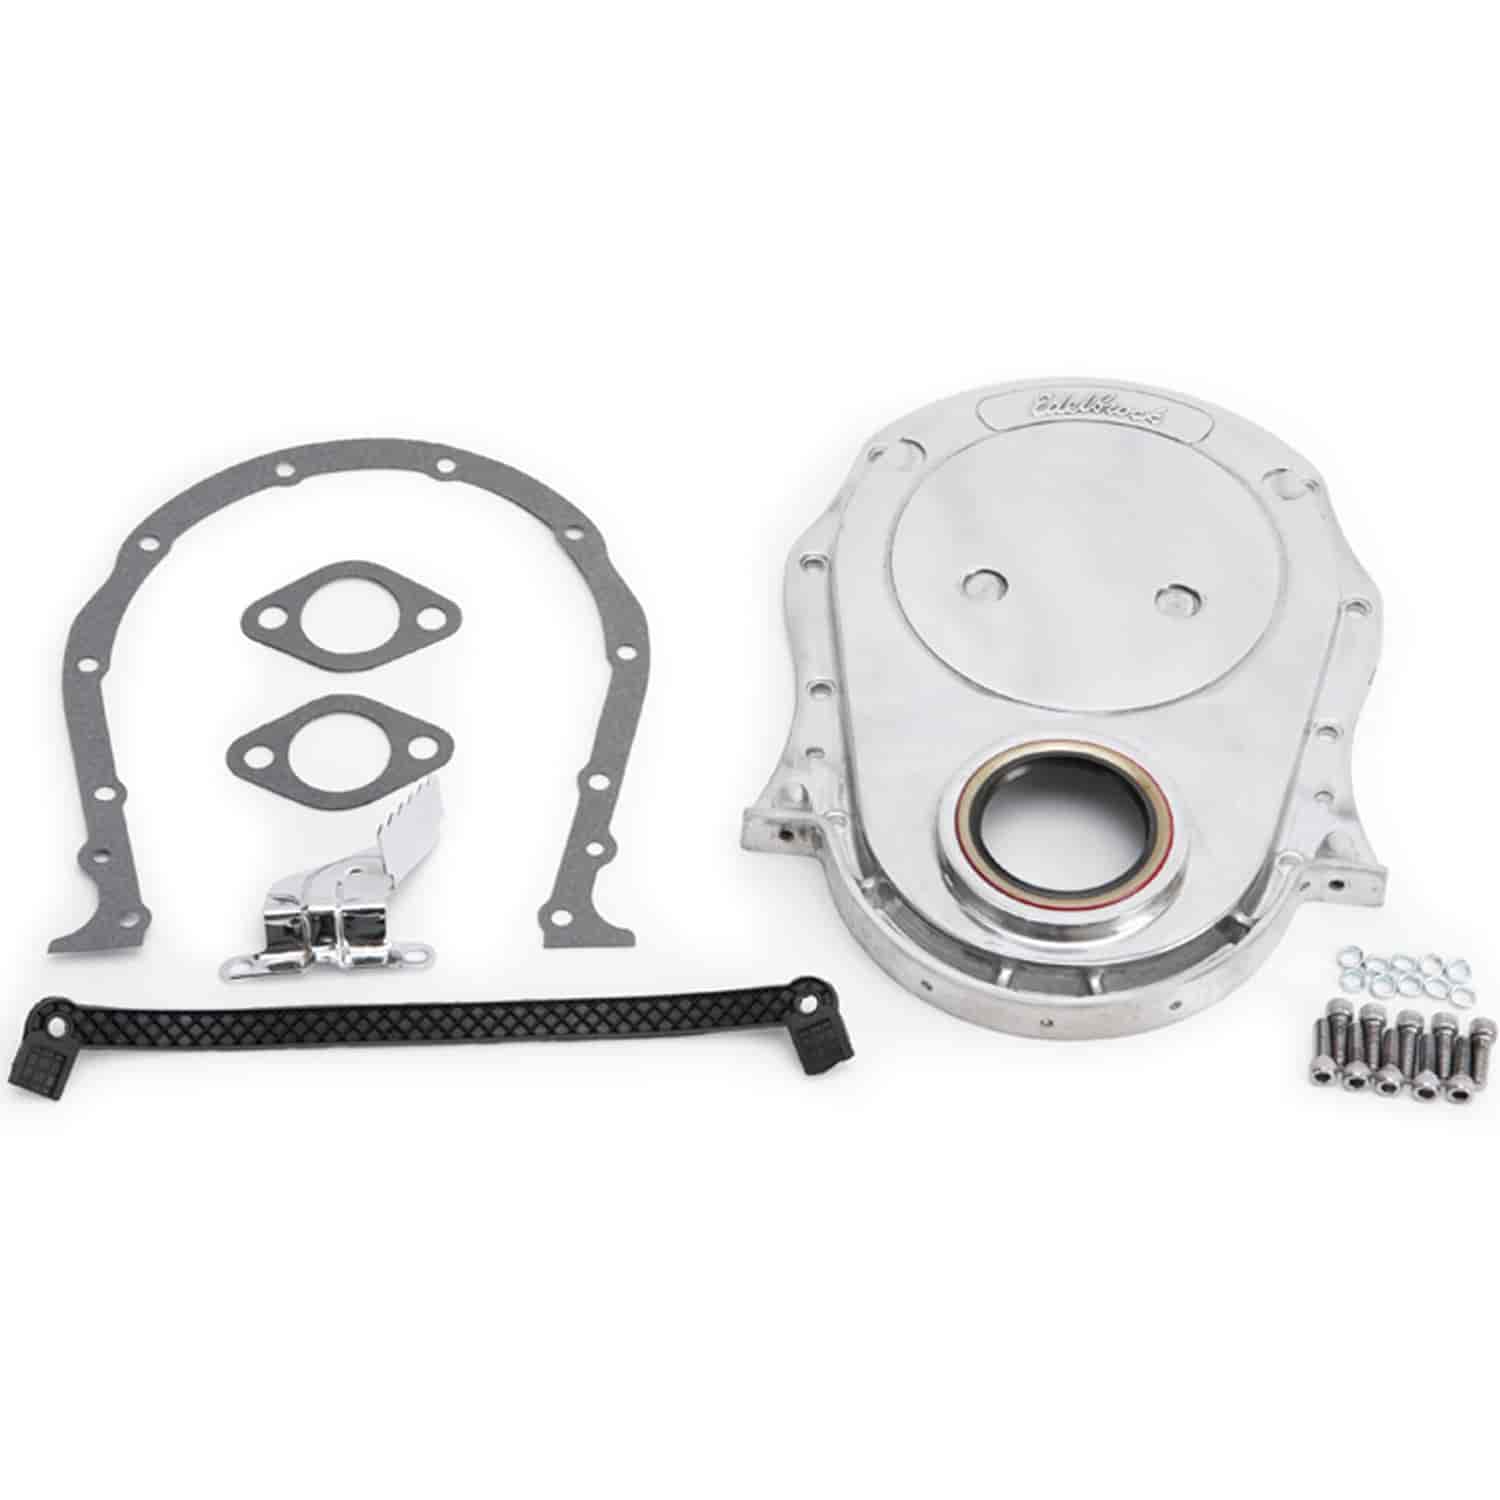 JEGS Timing Cover Fits 1965-1990 Big Block Chevy Engines Polished Cast Aluminum Includes Timing Cover, Timing Cover Gasket, Water Pump Gaskets, - 1